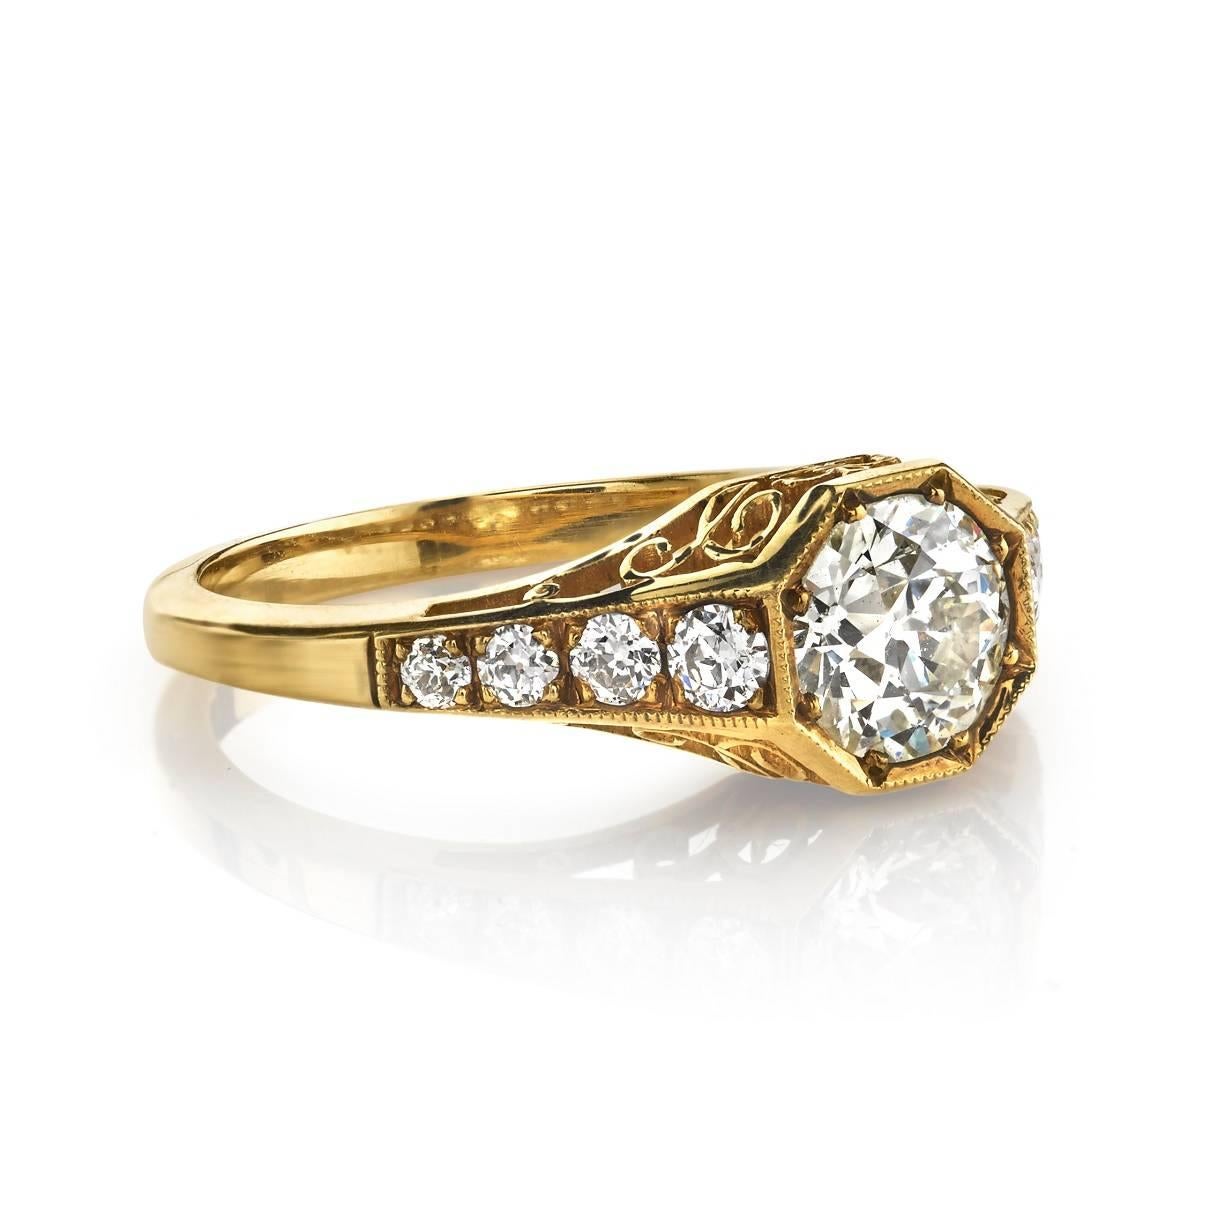 0.73ct K/VS1 EGL certified old European cut diamond set in a handcrafted 18k oxidized yellow gold mounting.